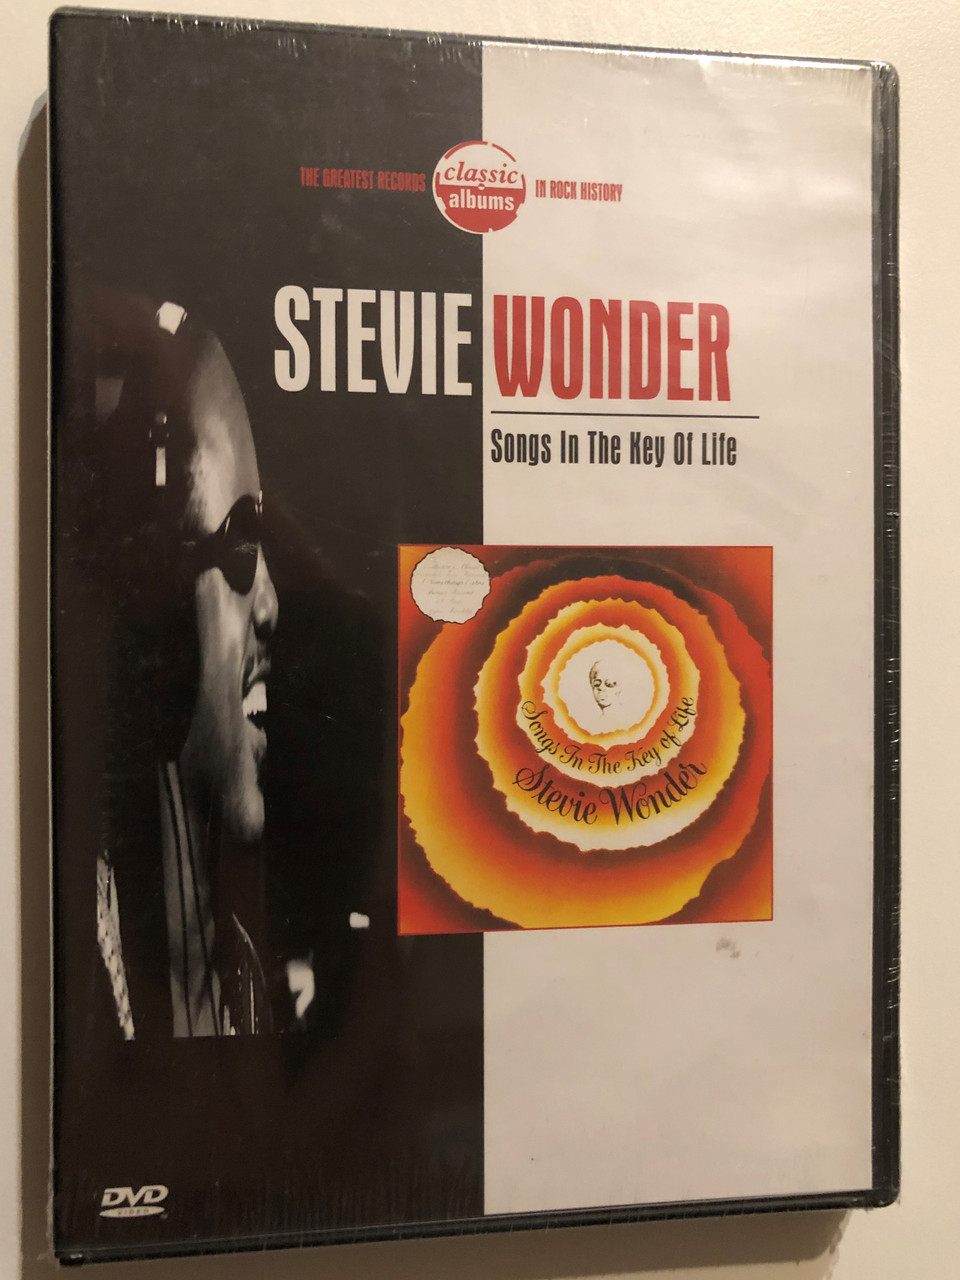 Songs in the Key of Life Stevie Wonder / The Greatest Records in the Rock  History / Classsic Albums / Eagle Rock Entertainment PLC / MAWA Film &  Medien / 1998 DVD - bibleinmylanguage